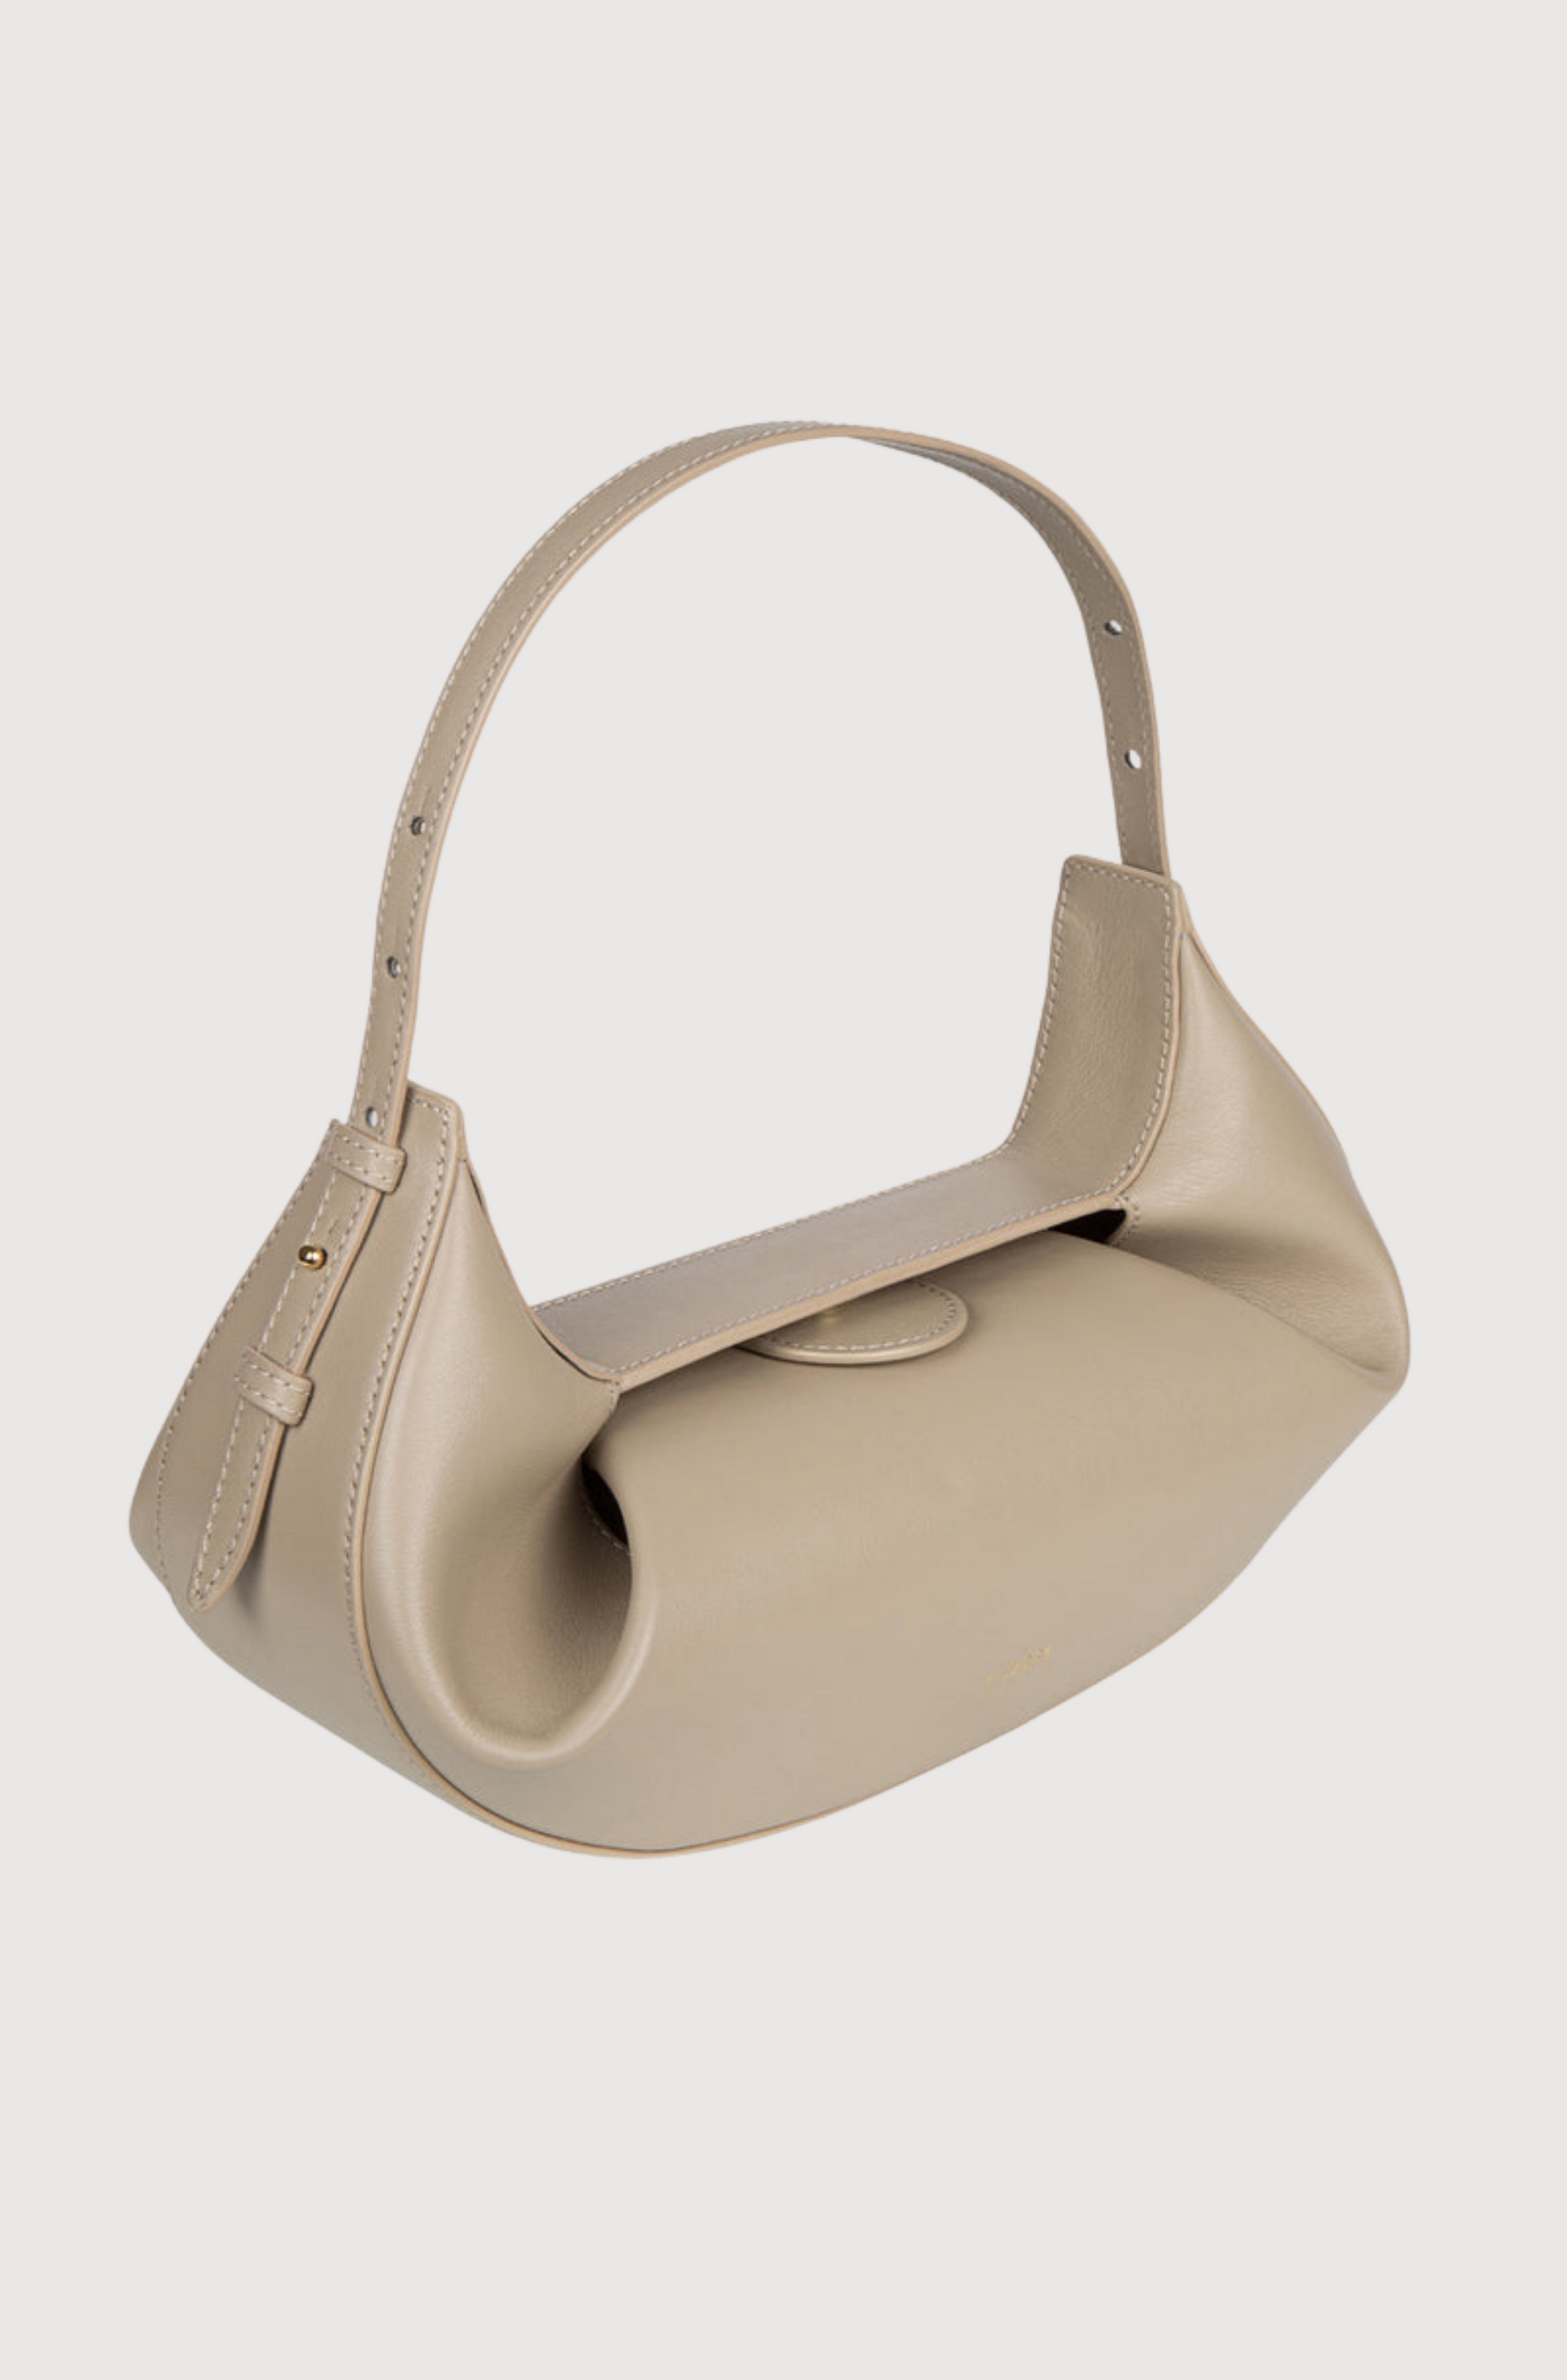 Yuzefi Mini Fortune Cookie Leather Bag in Natural